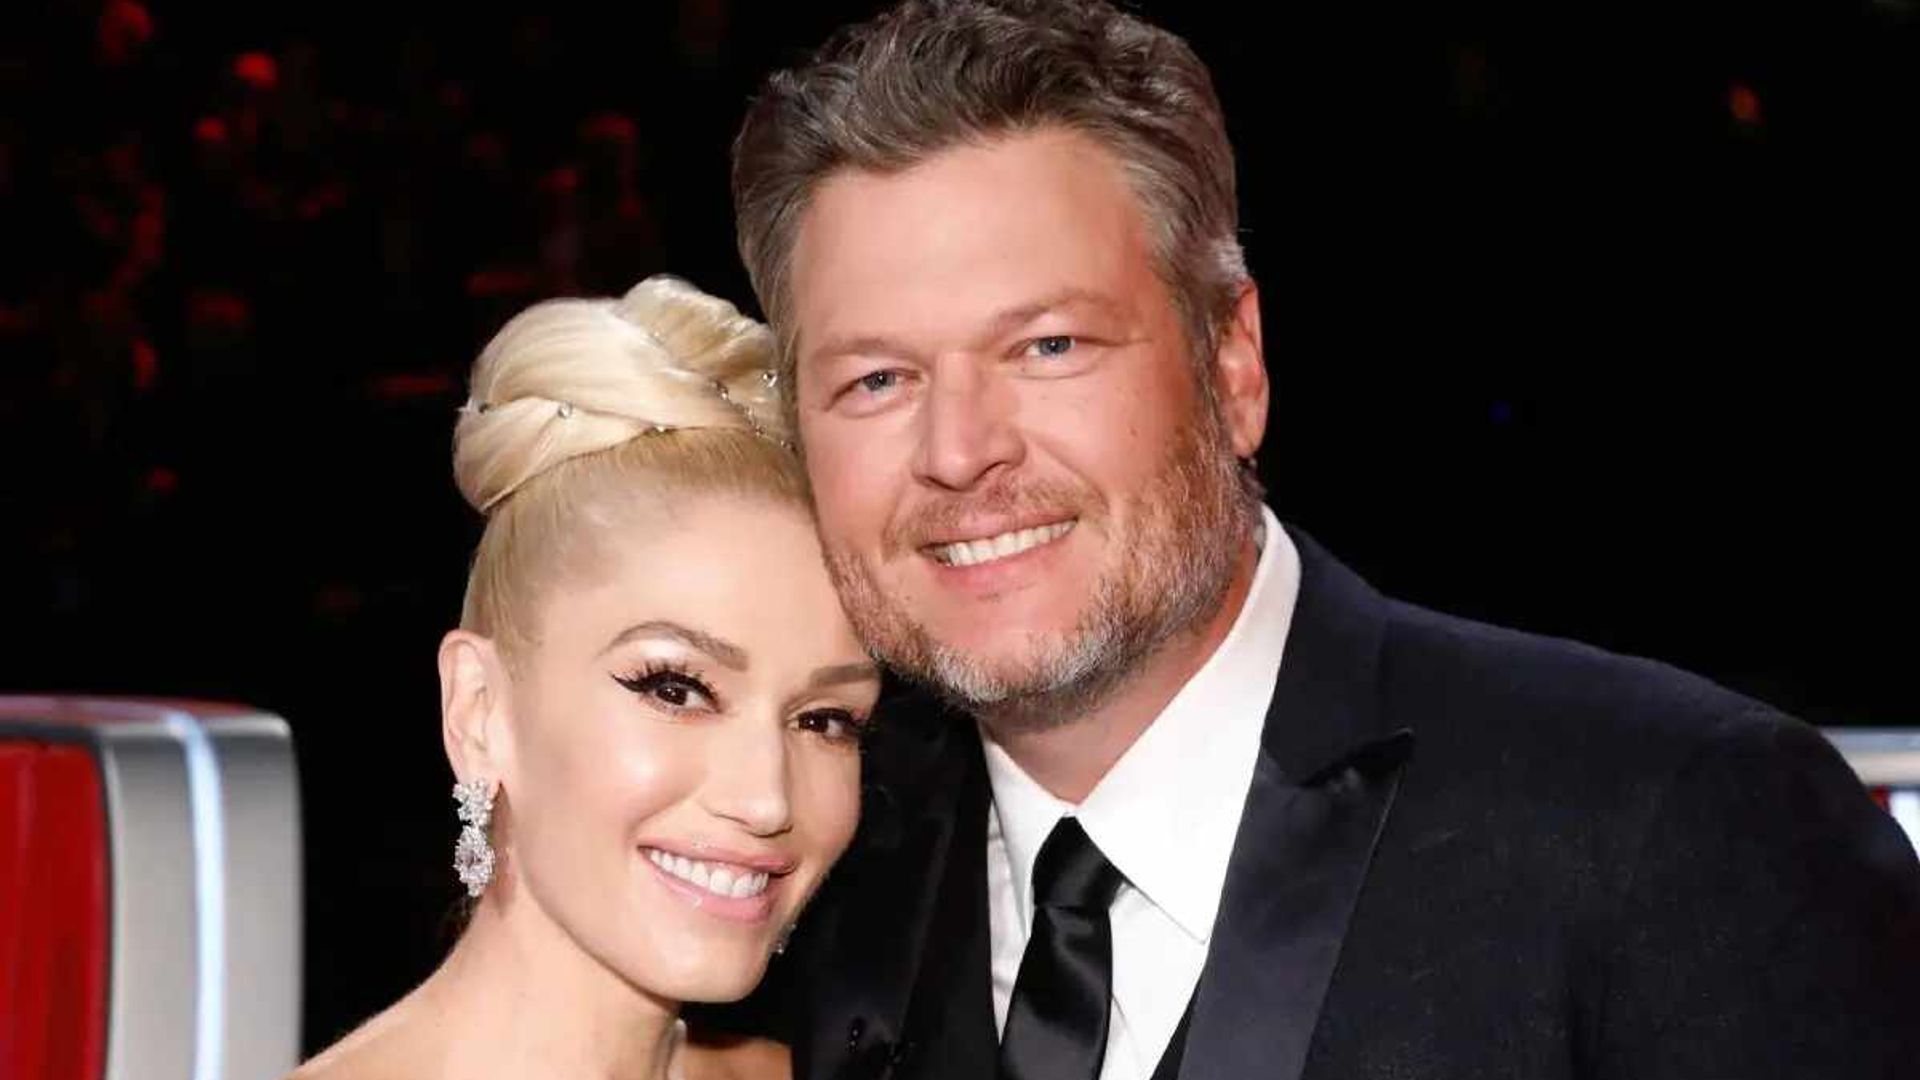 Gwen Stefani and Blake Shelton's holidays will be extra special this year - all the details